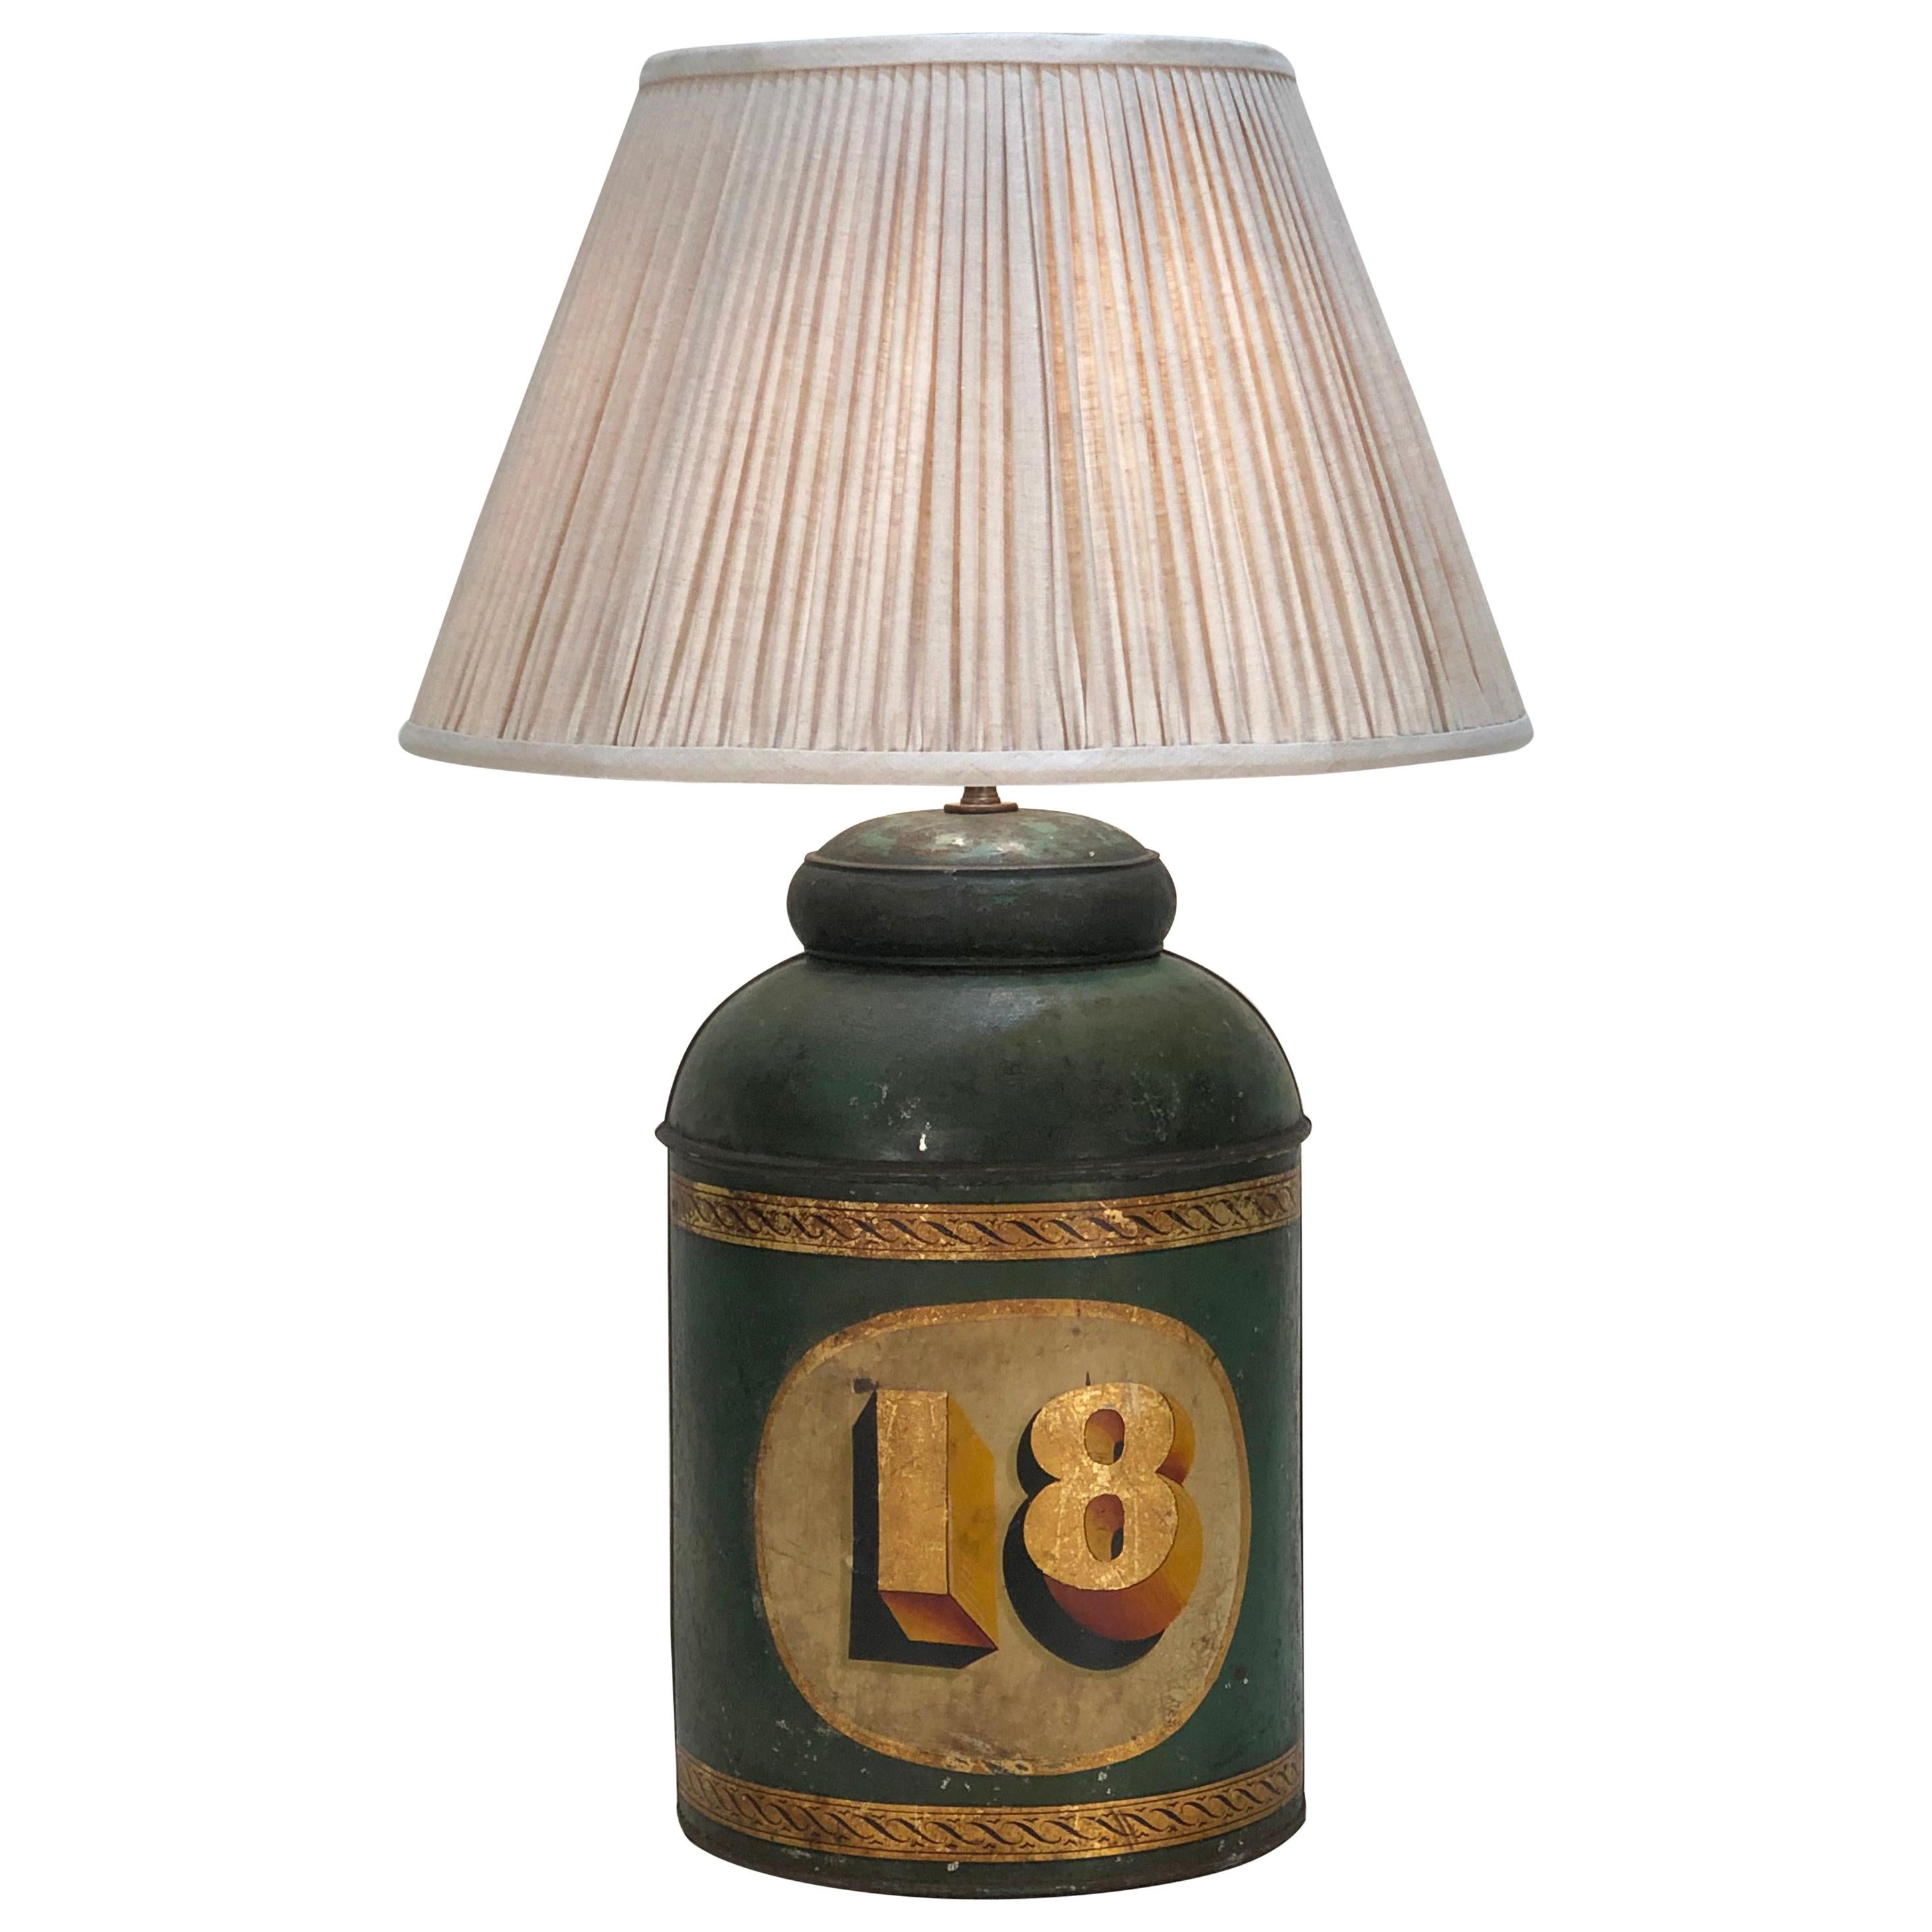 Mid-19th Century English Tole Spice or Tea Canister, Now as a Lamp